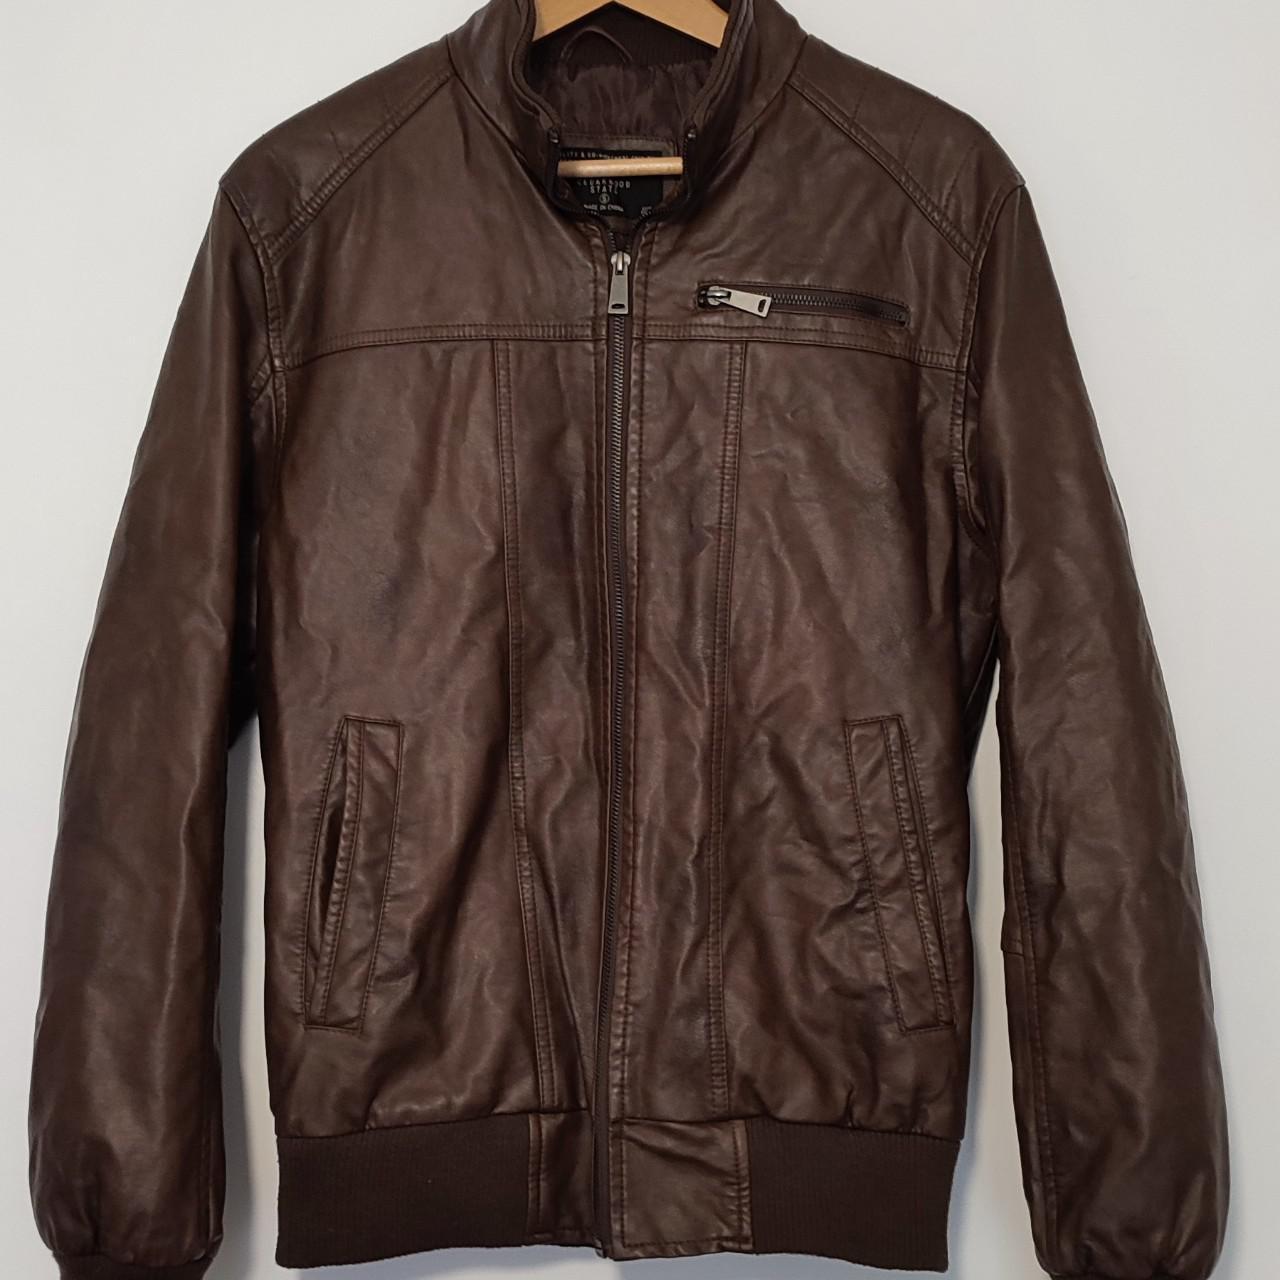 Primark men's brown leather jacket in size small but... - Depop